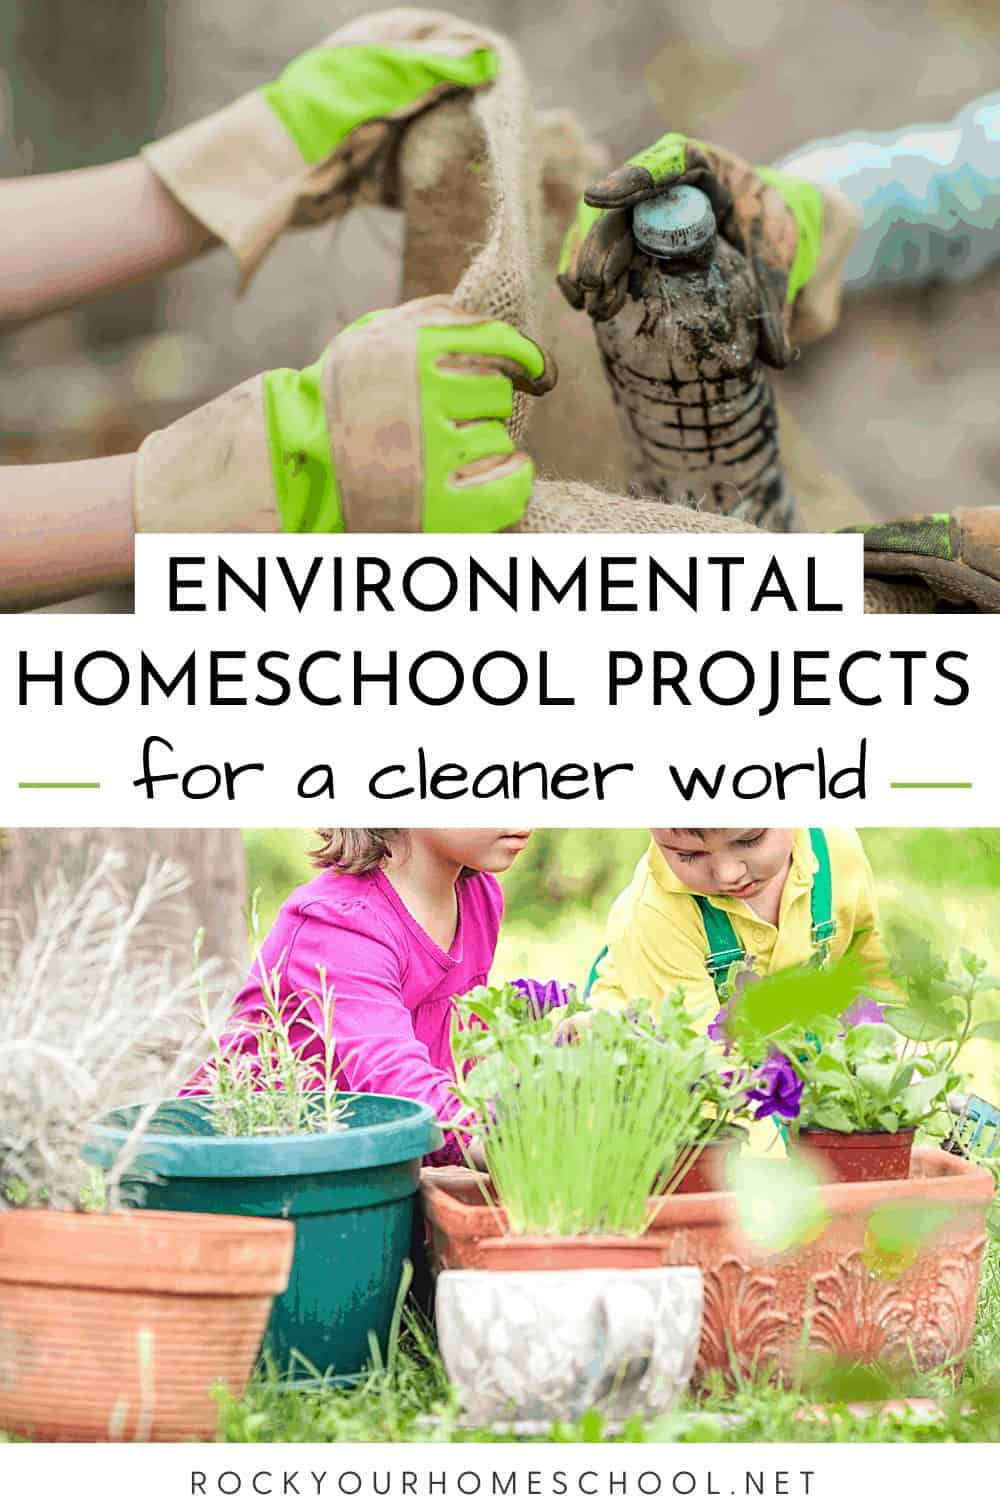 6 Excellent Environmental Homeschool Projects for a Cleaner World